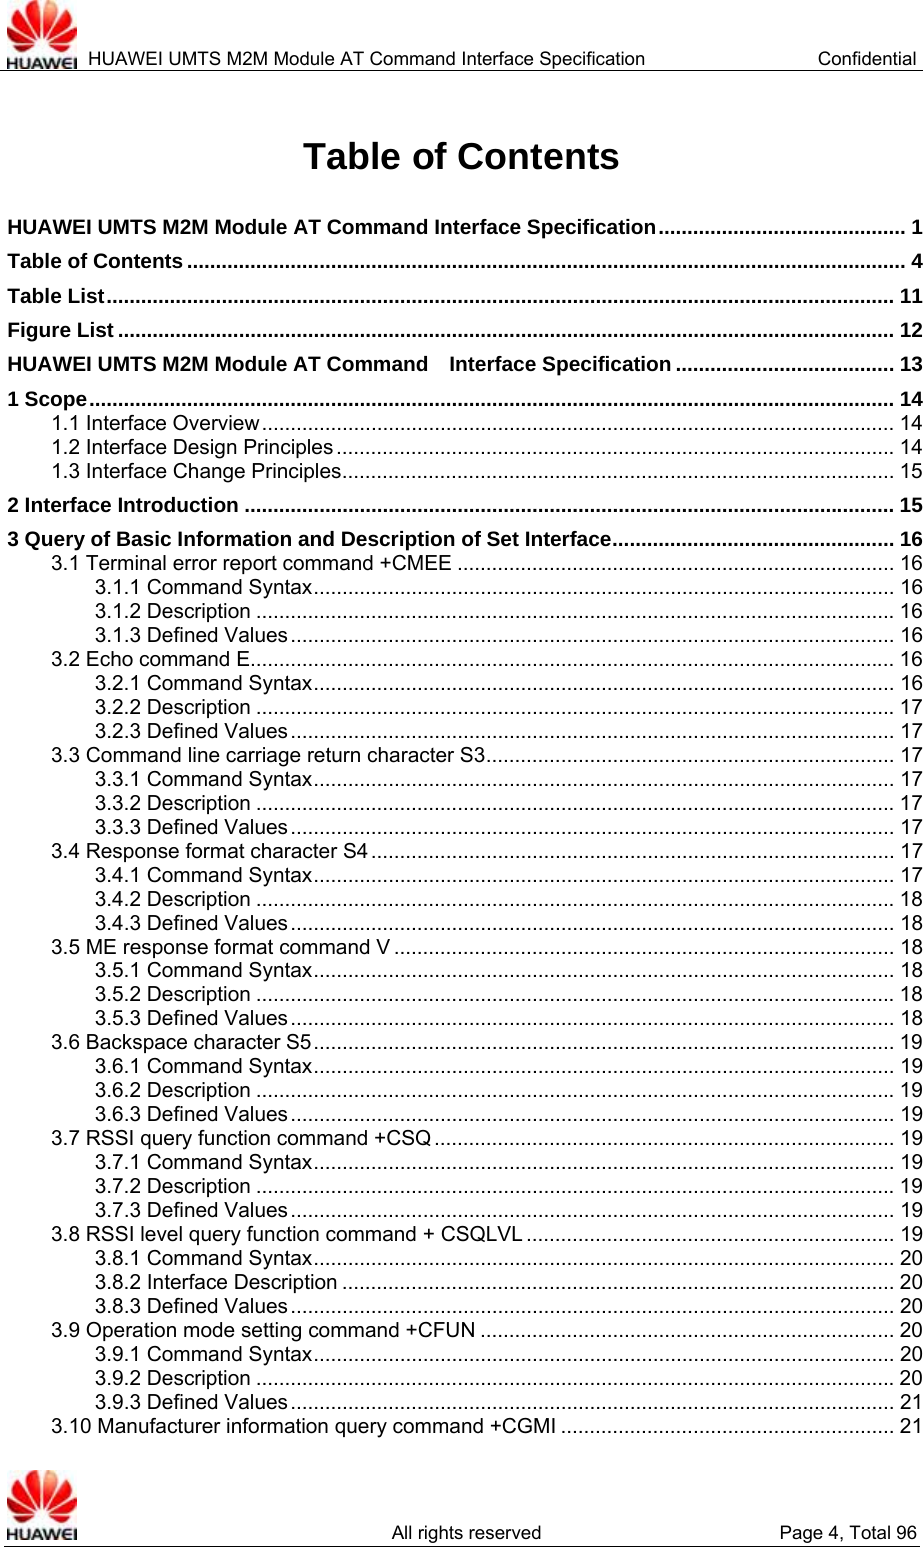  HUAWEI UMTS M2M Module AT Command Interface Specification  Confidential   All rights reserved  Page 4, Total 96 Table of Contents HUAWEI UMTS M2M Module AT Command Interface Specification........................................... 1 Table of Contents ............................................................................................................................. 4 Table List......................................................................................................................................... 11 Figure List ....................................................................................................................................... 12 HUAWEI UMTS M2M Module AT Command  Interface Specification ...................................... 13 1 Scope............................................................................................................................................ 14 1.1 Interface Overview.............................................................................................................. 14 1.2 Interface Design Principles .................................................................................................14 1.3 Interface Change Principles................................................................................................ 15 2 Interface Introduction ................................................................................................................. 15 3 Query of Basic Information and Description of Set Interface................................................. 16 3.1 Terminal error report command +CMEE ............................................................................ 16 3.1.1 Command Syntax..................................................................................................... 16 3.1.2 Description ...............................................................................................................16 3.1.3 Defined Values......................................................................................................... 16 3.2 Echo command E................................................................................................................ 16 3.2.1 Command Syntax..................................................................................................... 16 3.2.2 Description ...............................................................................................................17 3.2.3 Defined Values......................................................................................................... 17 3.3 Command line carriage return character S3....................................................................... 17 3.3.1 Command Syntax..................................................................................................... 17 3.3.2 Description ...............................................................................................................17 3.3.3 Defined Values......................................................................................................... 17 3.4 Response format character S4 ........................................................................................... 17 3.4.1 Command Syntax..................................................................................................... 17 3.4.2 Description ...............................................................................................................18 3.4.3 Defined Values......................................................................................................... 18 3.5 ME response format command V ....................................................................................... 18 3.5.1 Command Syntax..................................................................................................... 18 3.5.2 Description ...............................................................................................................18 3.5.3 Defined Values......................................................................................................... 18 3.6 Backspace character S5..................................................................................................... 19 3.6.1 Command Syntax..................................................................................................... 19 3.6.2 Description ...............................................................................................................19 3.6.3 Defined Values......................................................................................................... 19 3.7 RSSI query function command +CSQ ................................................................................ 19 3.7.1 Command Syntax..................................................................................................... 19 3.7.2 Description ...............................................................................................................19 3.7.3 Defined Values......................................................................................................... 19 3.8 RSSI level query function command + CSQLVL ................................................................ 19 3.8.1 Command Syntax..................................................................................................... 20 3.8.2 Interface Description ................................................................................................ 20 3.8.3 Defined Values......................................................................................................... 20 3.9 Operation mode setting command +CFUN ........................................................................ 20 3.9.1 Command Syntax..................................................................................................... 20 3.9.2 Description ...............................................................................................................20 3.9.3 Defined Values......................................................................................................... 21 3.10 Manufacturer information query command +CGMI .......................................................... 21 